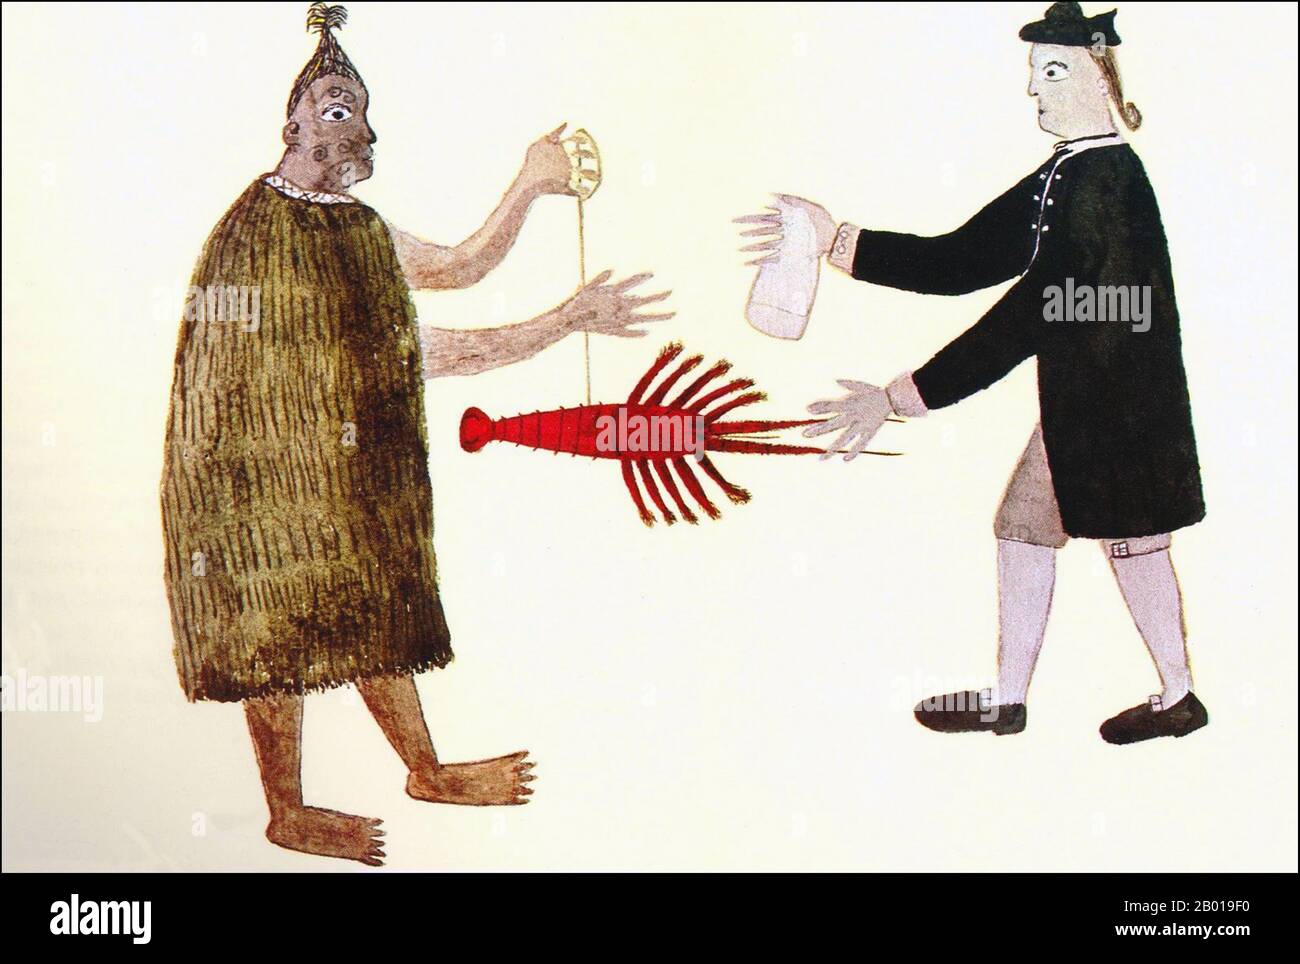 Tahiti: 'A Maori man and Joseph Banks exchanging a crayfish for a piece of cloth'. Drawing by Tupaia (c. 1725 - 20 December 1770), c. 1769.  Tupaia, a native of Raieatea, fled to Tahiti to escape attacking forces from Bora Bora island. A man of clear intelligence, he acted as intermediary, translator and explicator of Polynesian society for visiting European vessels. On Cook's arrival in 1769, Tupaia went on board Cook's voyage to New Zealand, Australia, and Java, where Tupaia eventually died after falling ill. Stock Photo